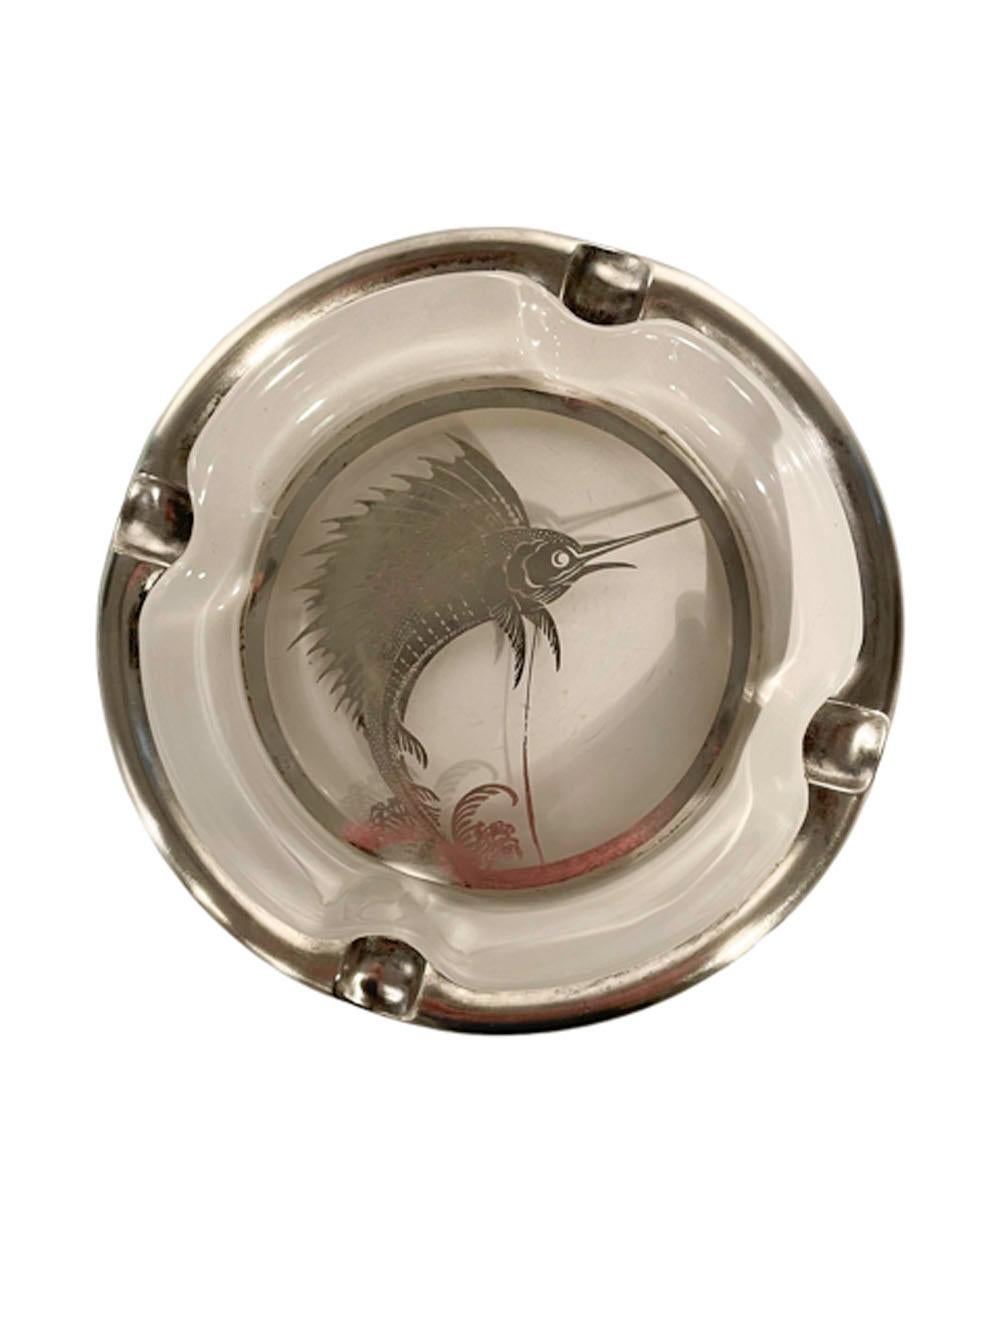 American Vintage Silver Overlay Glass Ashtray w/ Sailfish, Unusual Large Size, 8